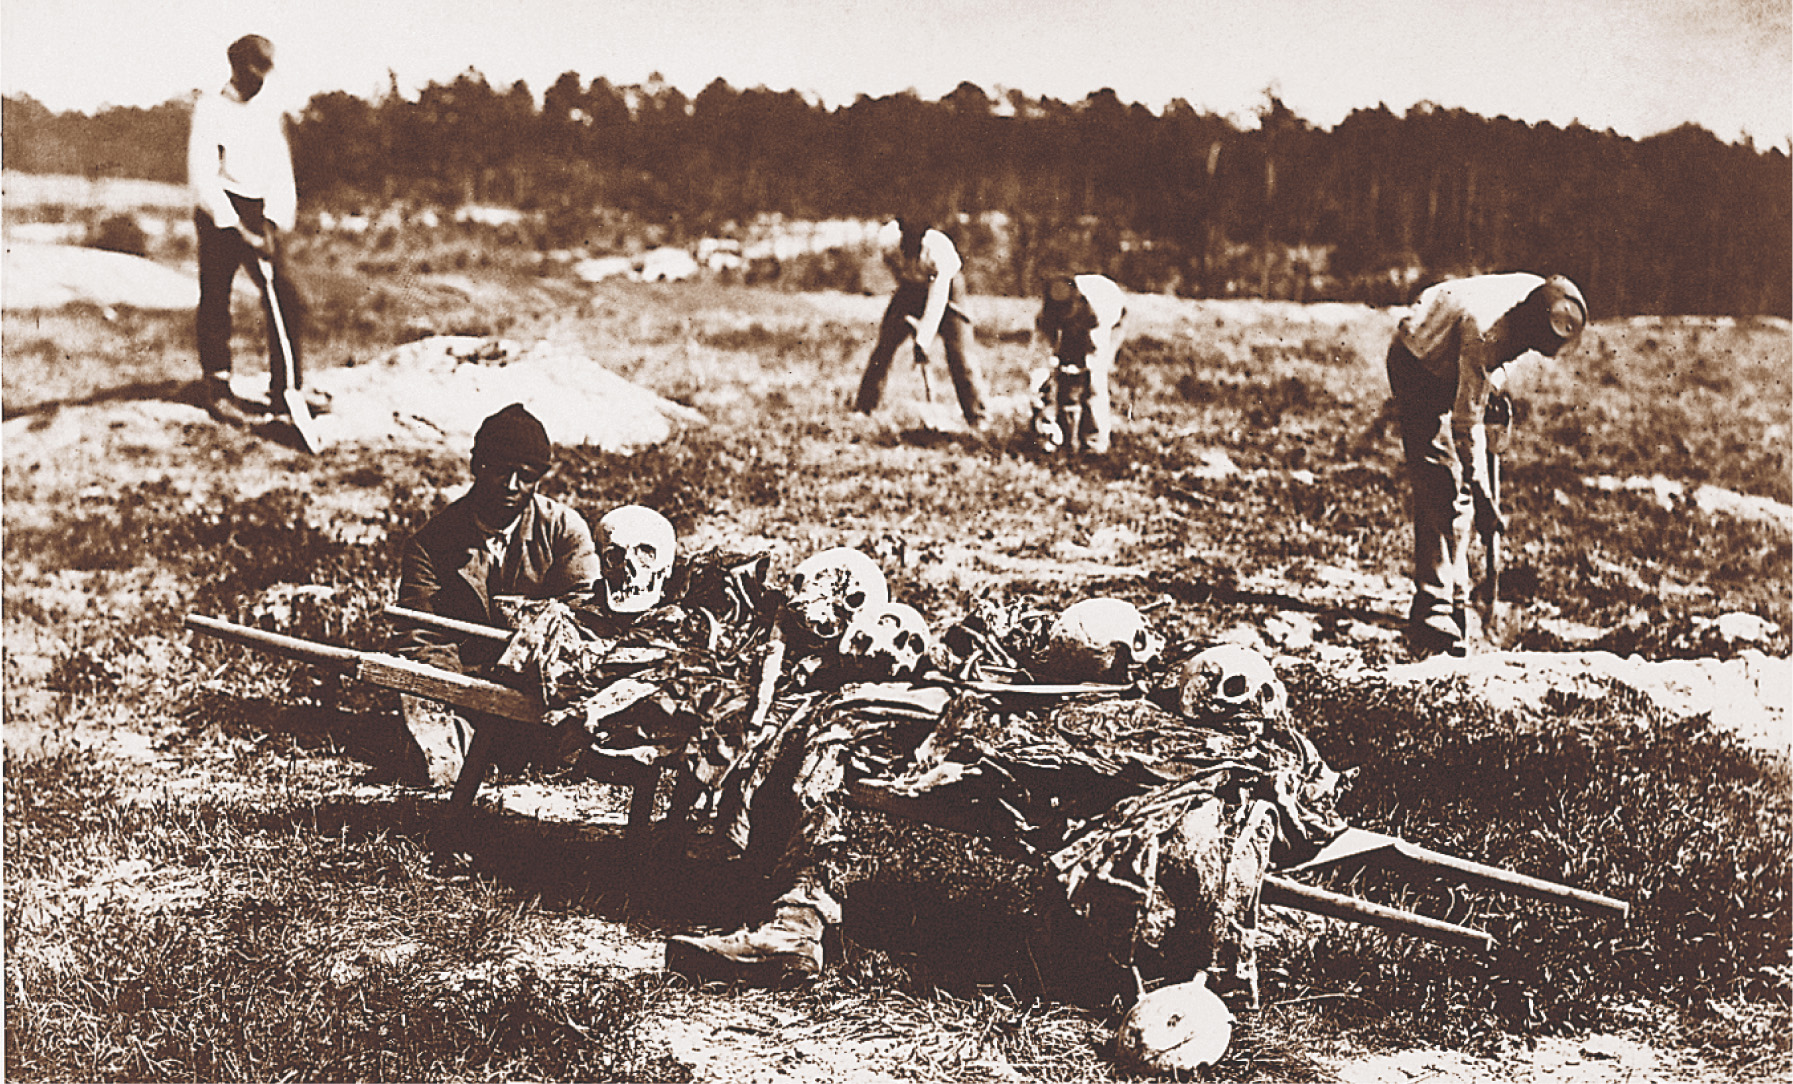 In a photo, African-American men load human skulls and body parts onto a cart.